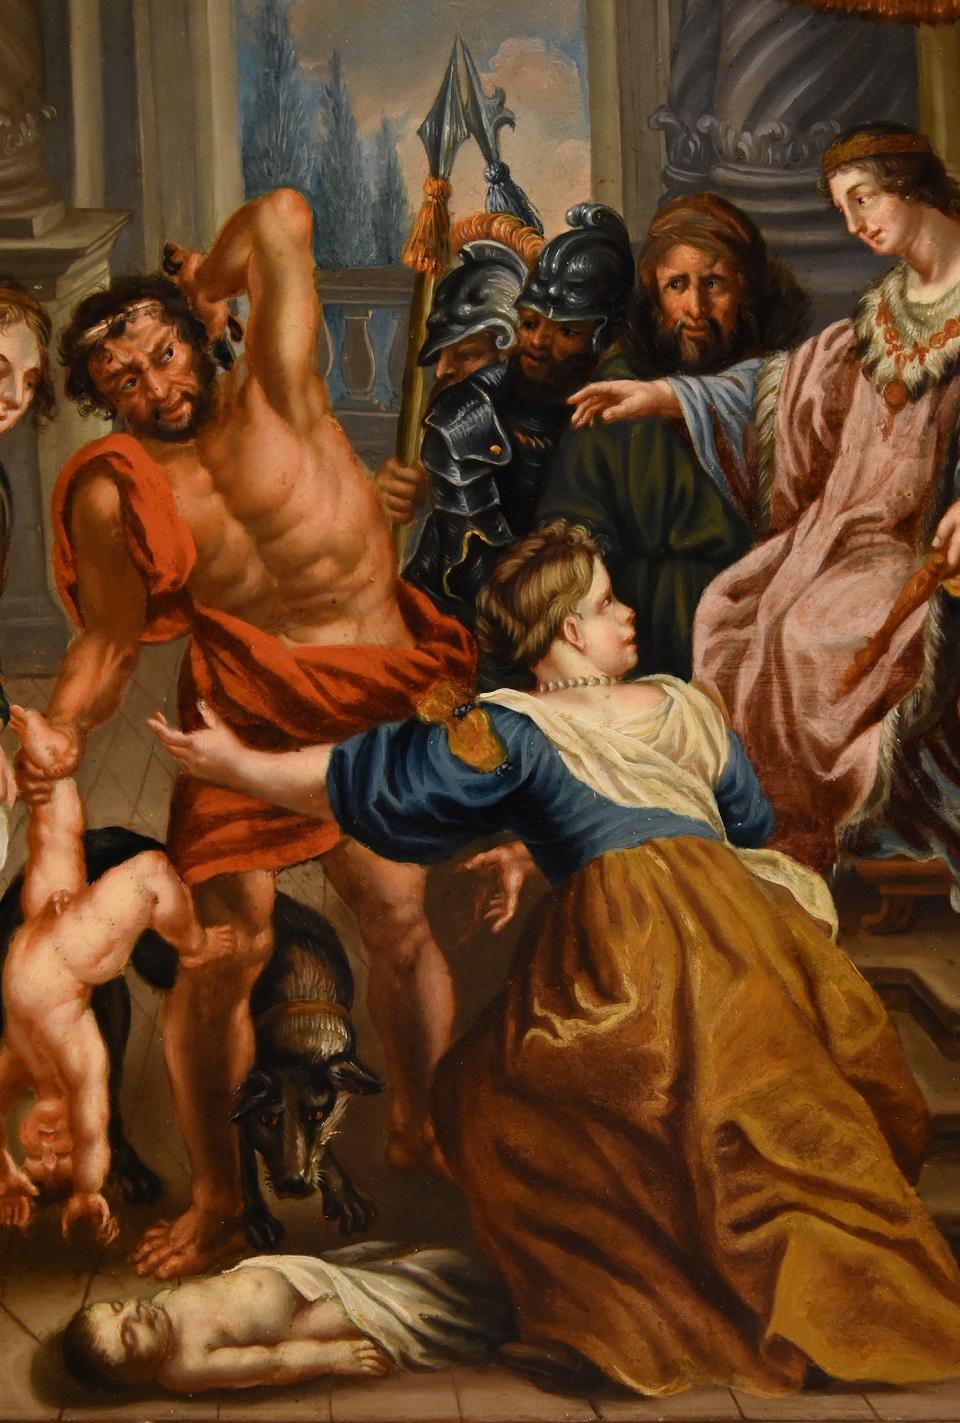 peter paul rubens work was particulary concerned with